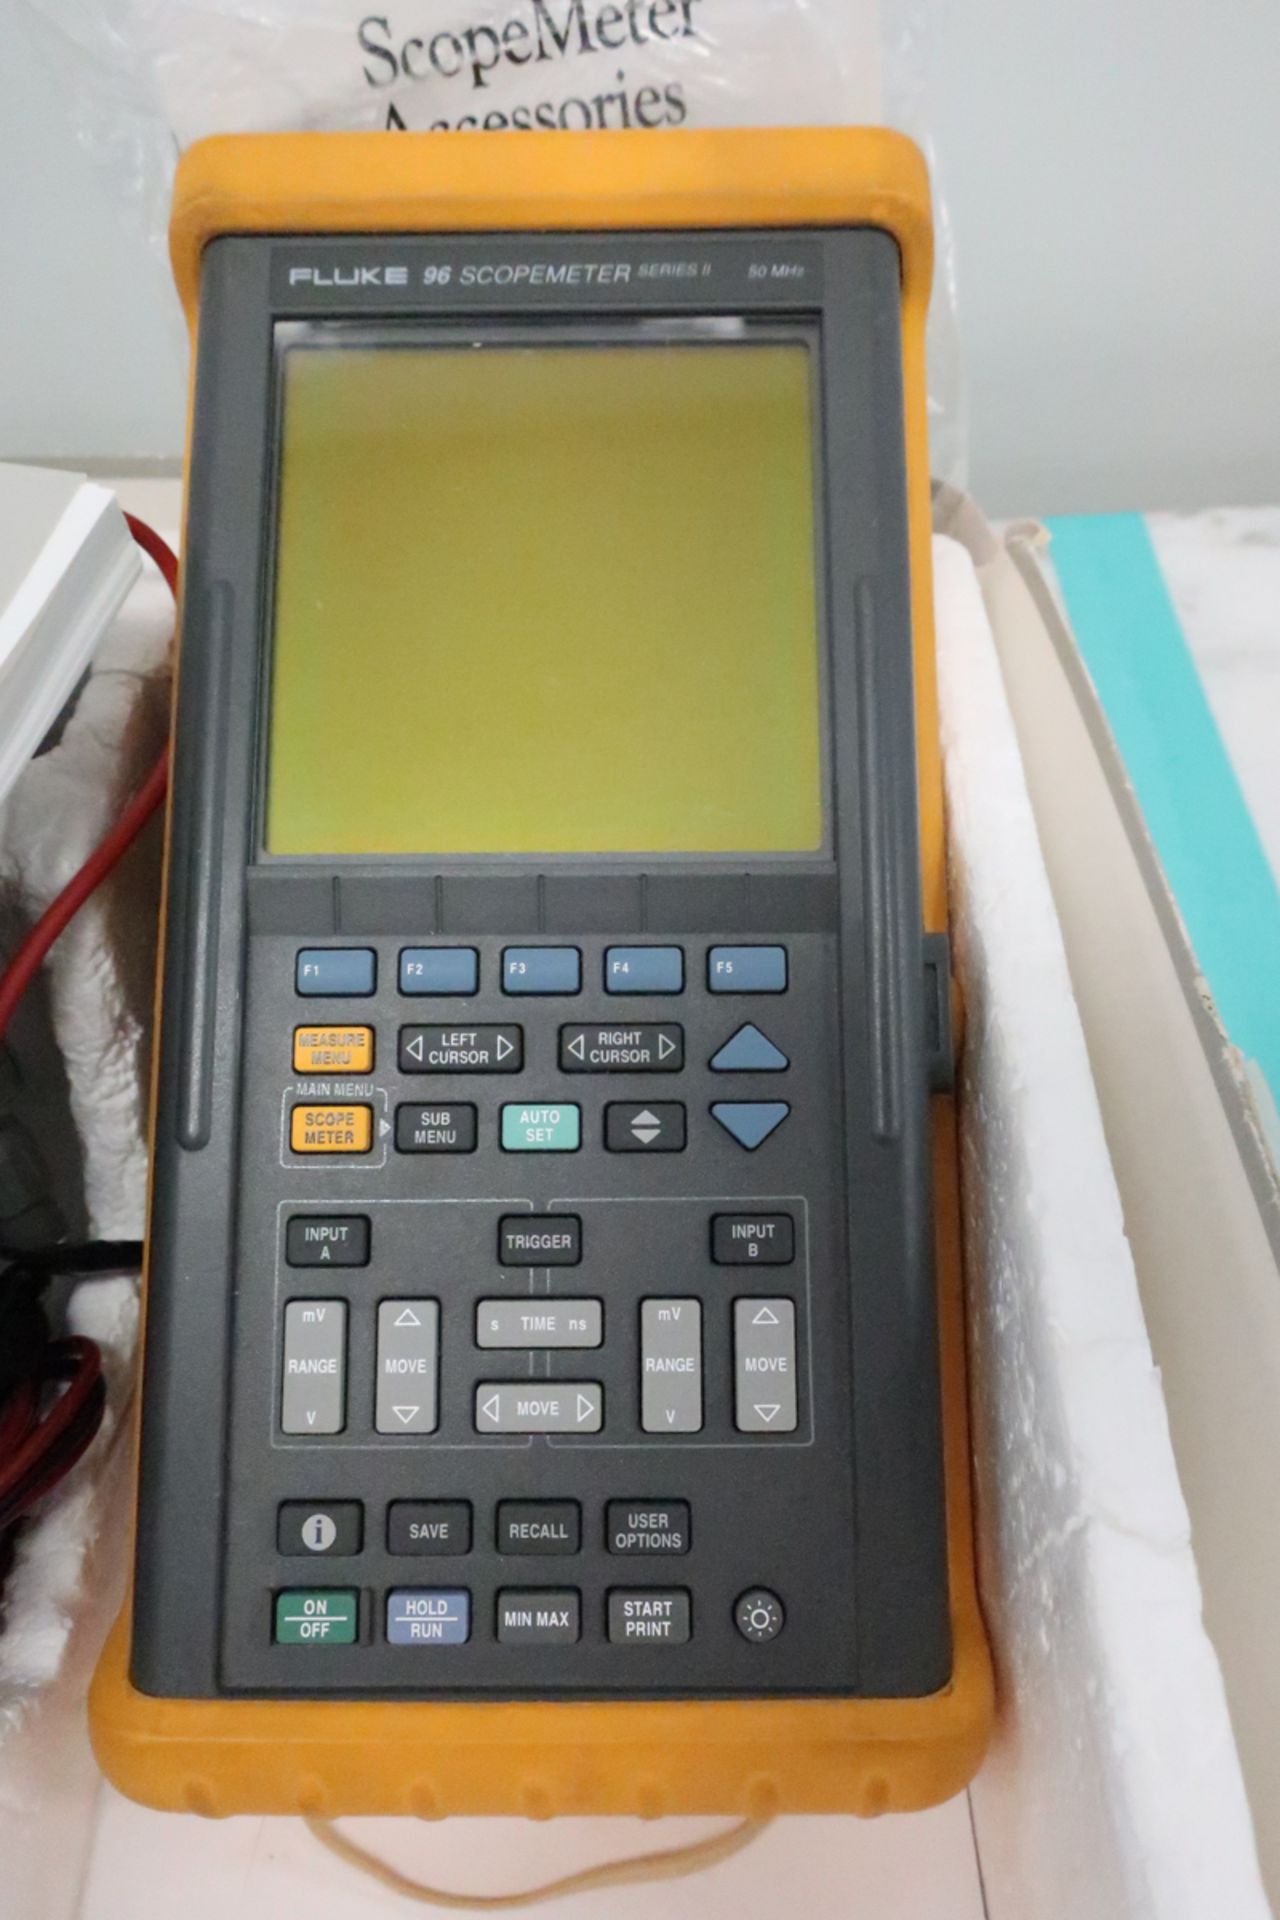 FLUKE SCOPE METER 96 ** NOT PART OF THE BULK BID, CONDITIONAL TO CREDITOR'S APPROVAL ***